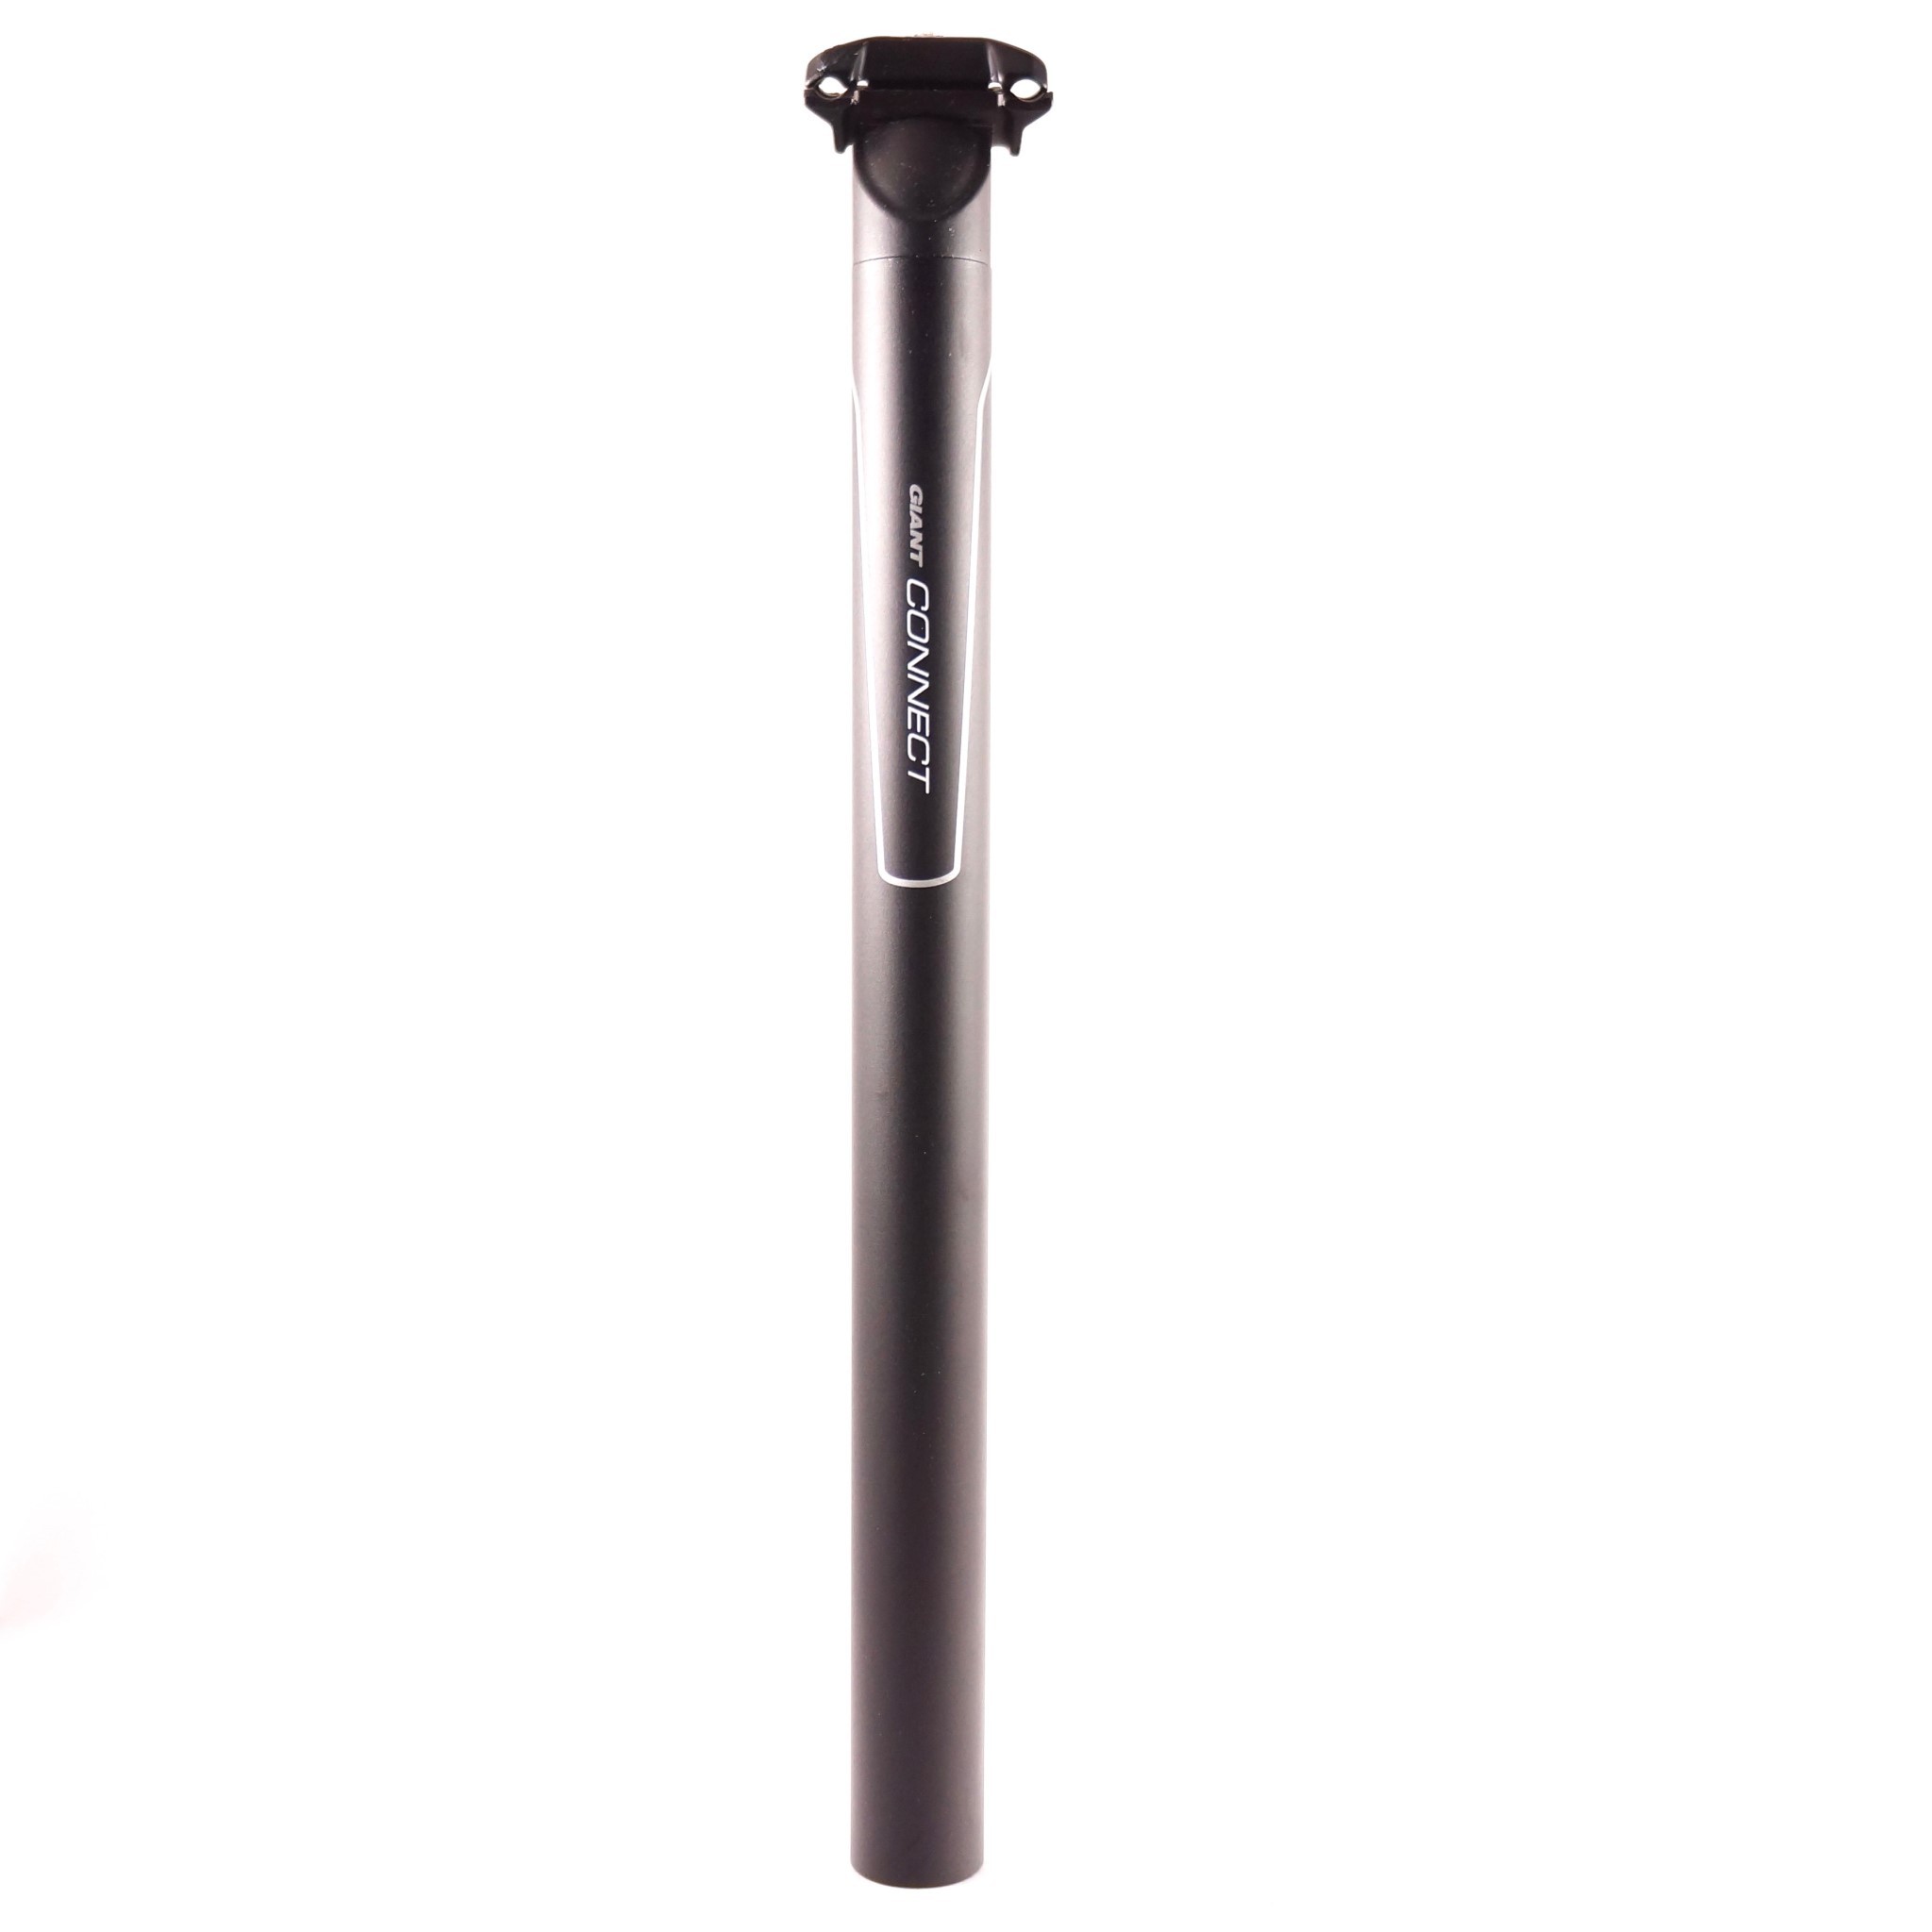 Giant Contact Bike Bicycle Offset Seatpost 27.2x400mm-30.9x400mm